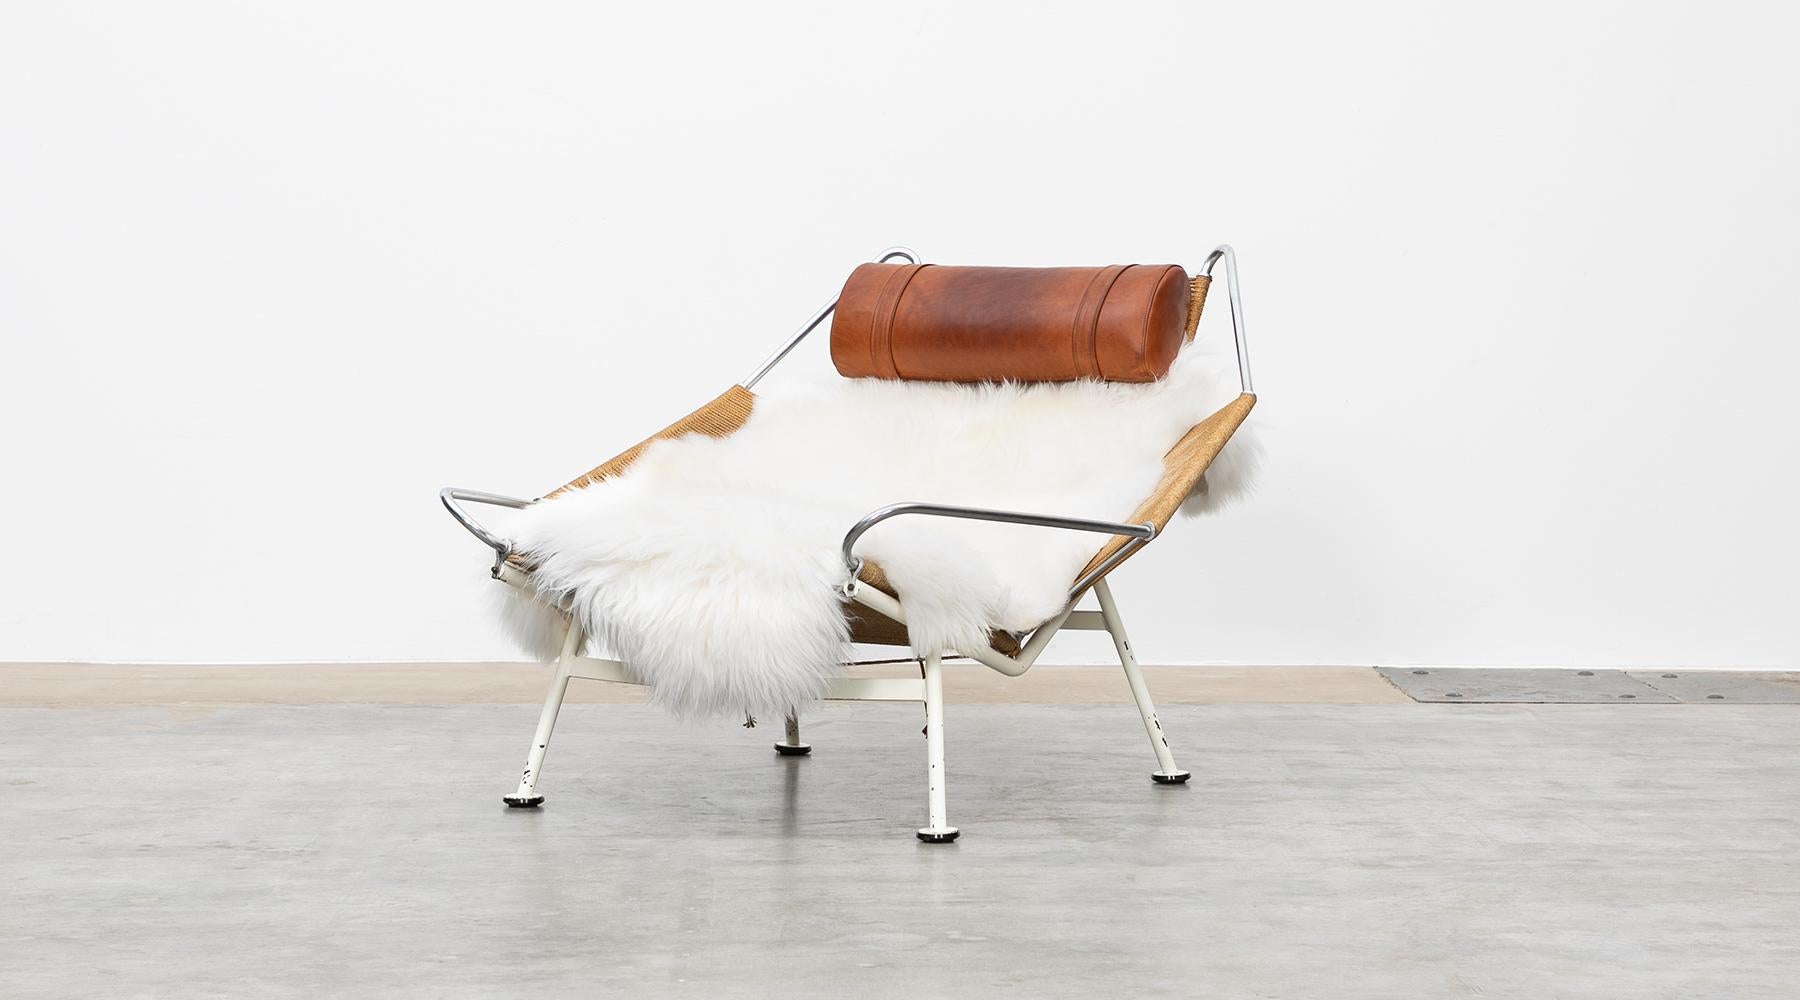 GE225, flag halyard lounge chair, metal, leather by Hans Wegner, Denmark, 1950.

The flag halyard chair has a white lacquered base so that it is visible as a supporting part. The seat shell with flag cord resting on it remained unpainted, so that